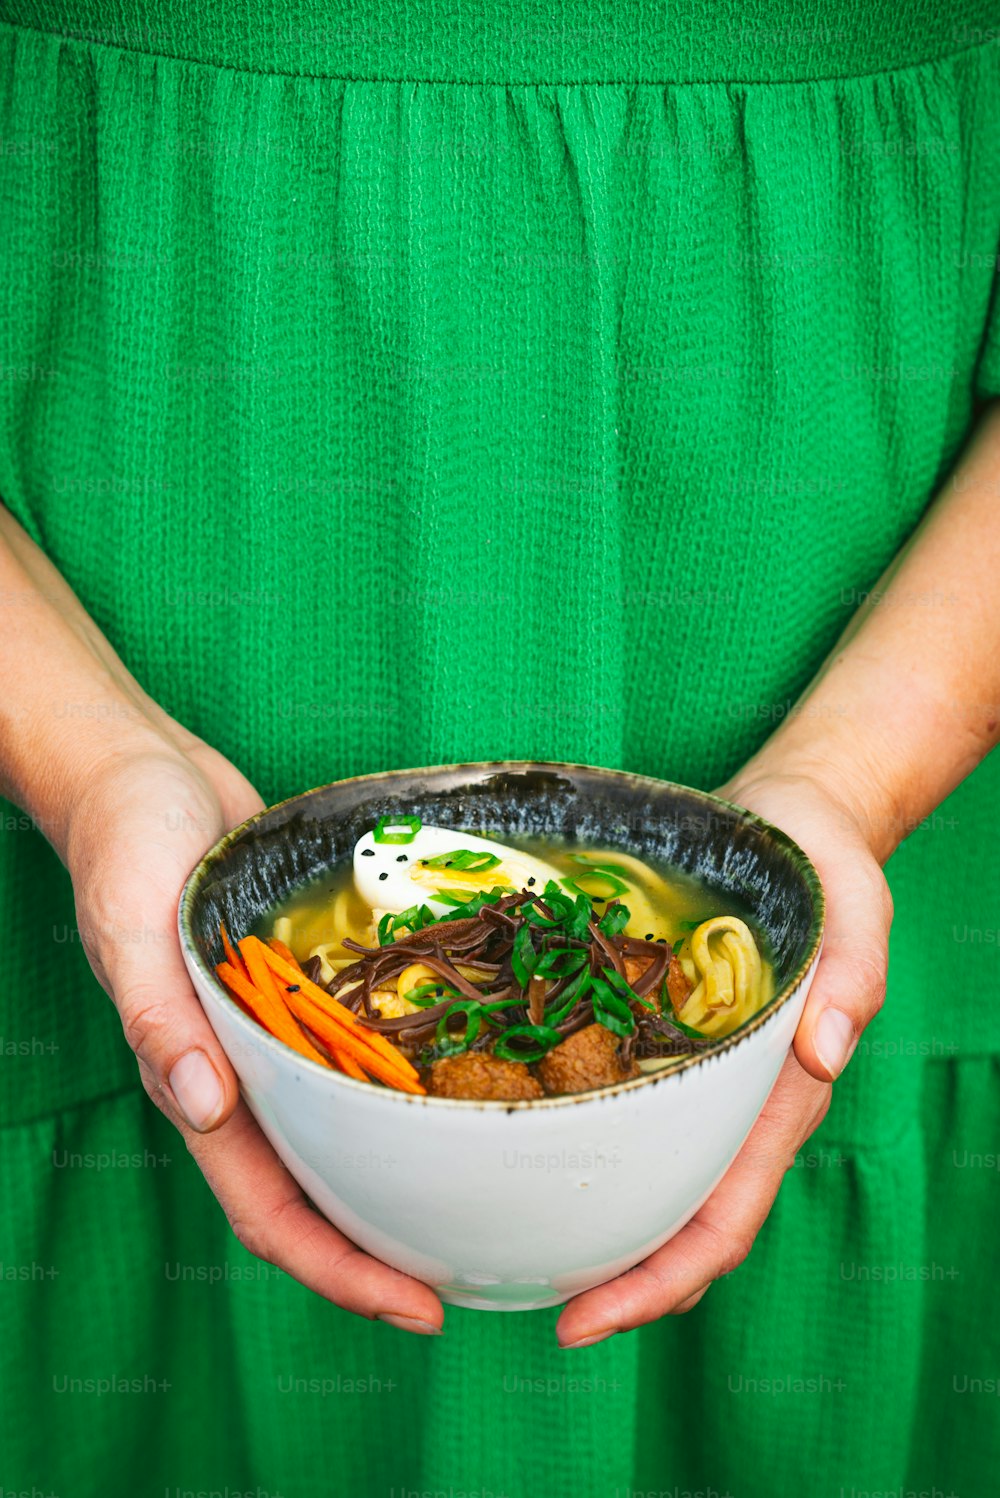 a woman in a green dress holding a bowl of food